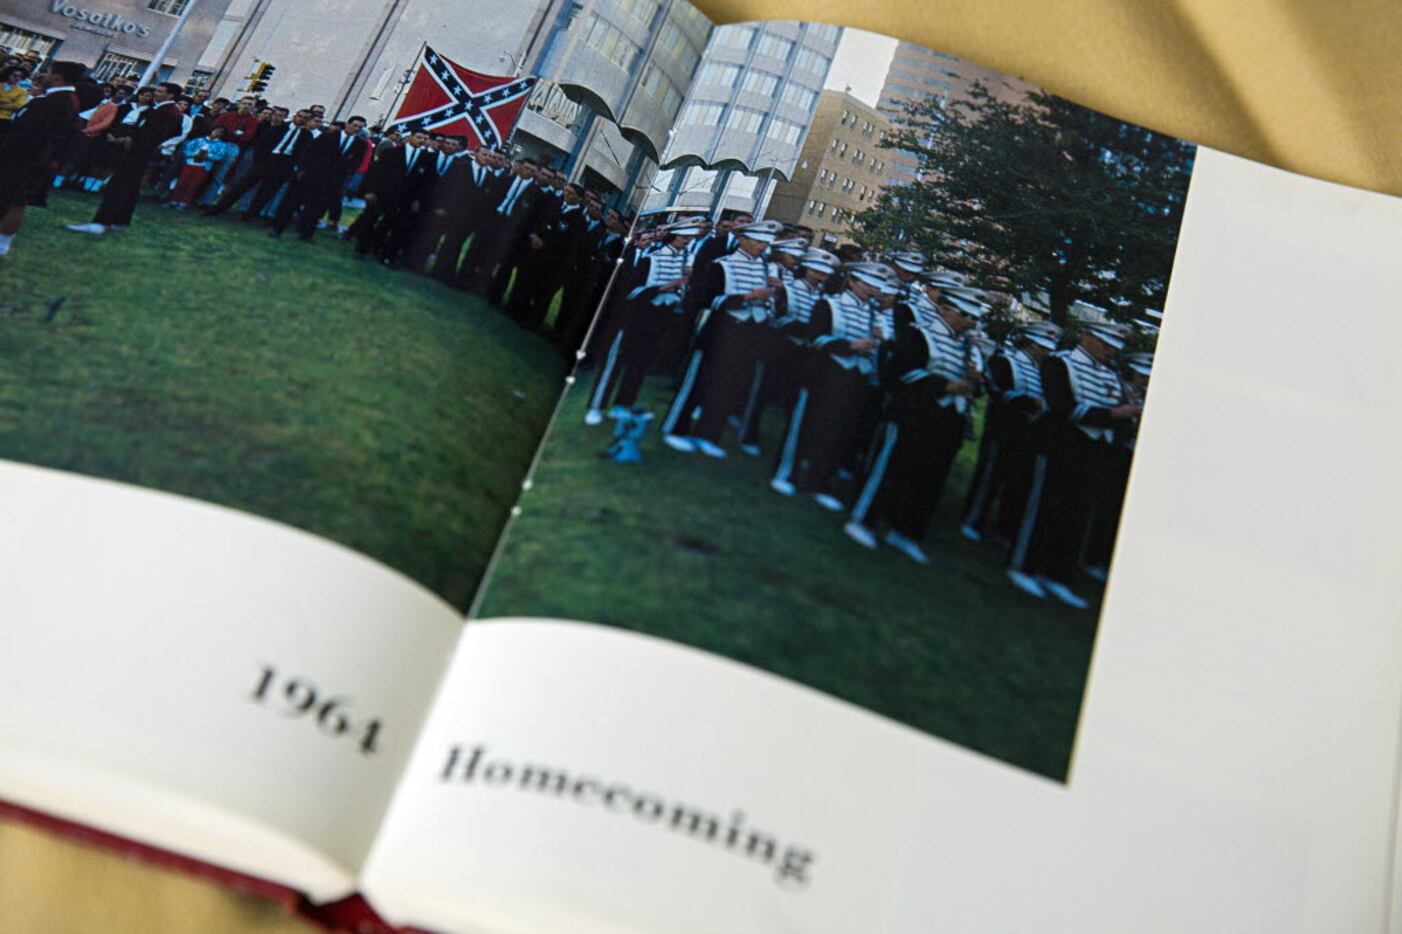 A yearbook from Midland Lee High School shows students during the 1964 homecoming parade...